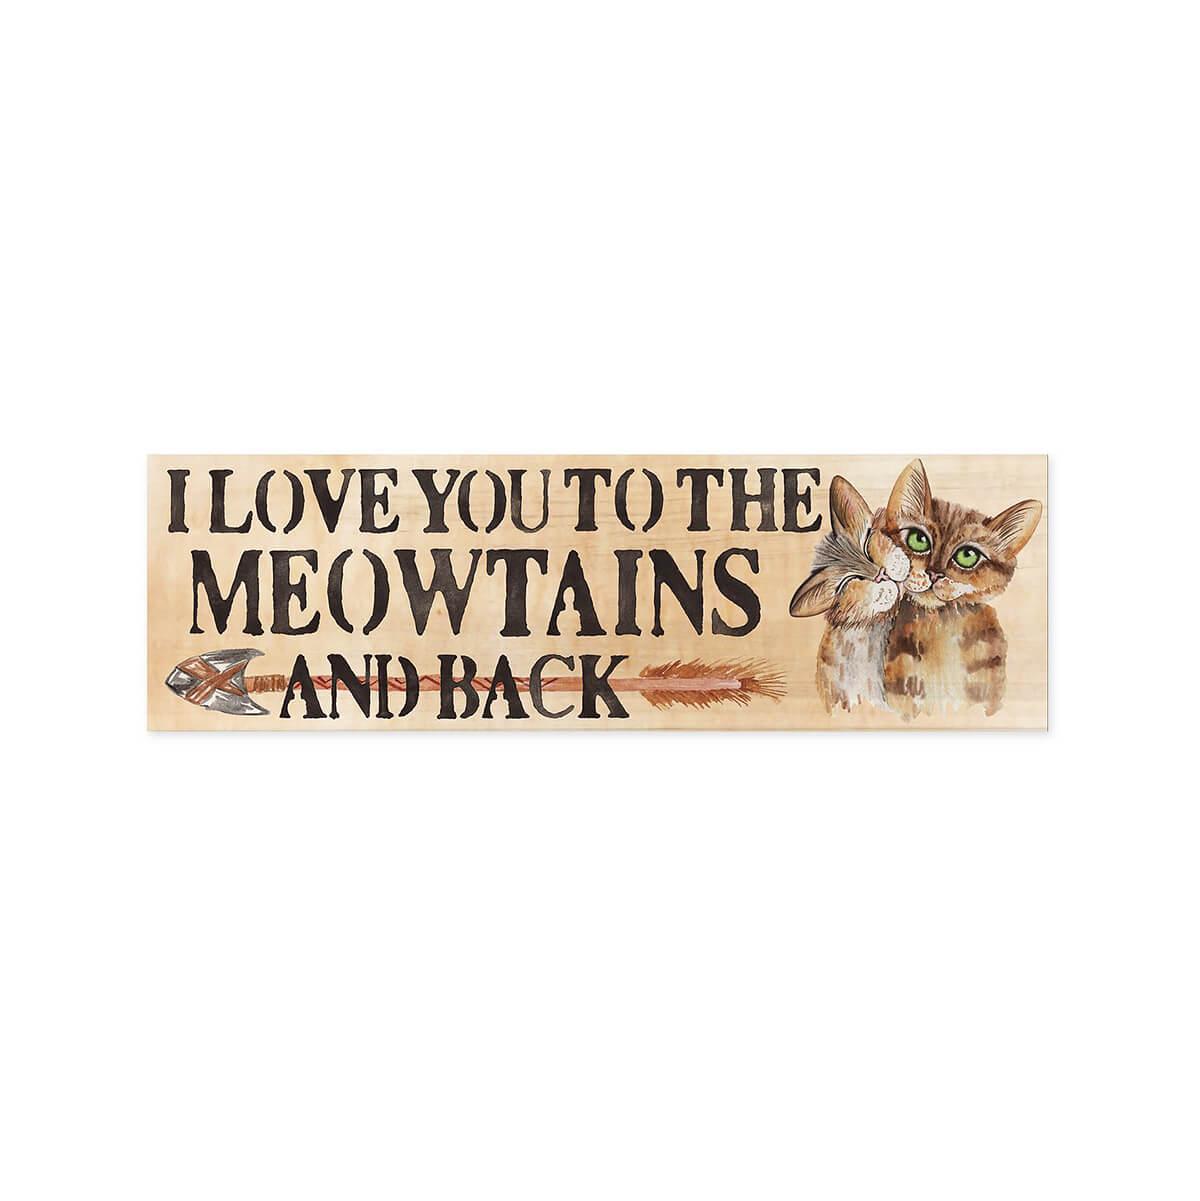  Meowtains Wooden Sign